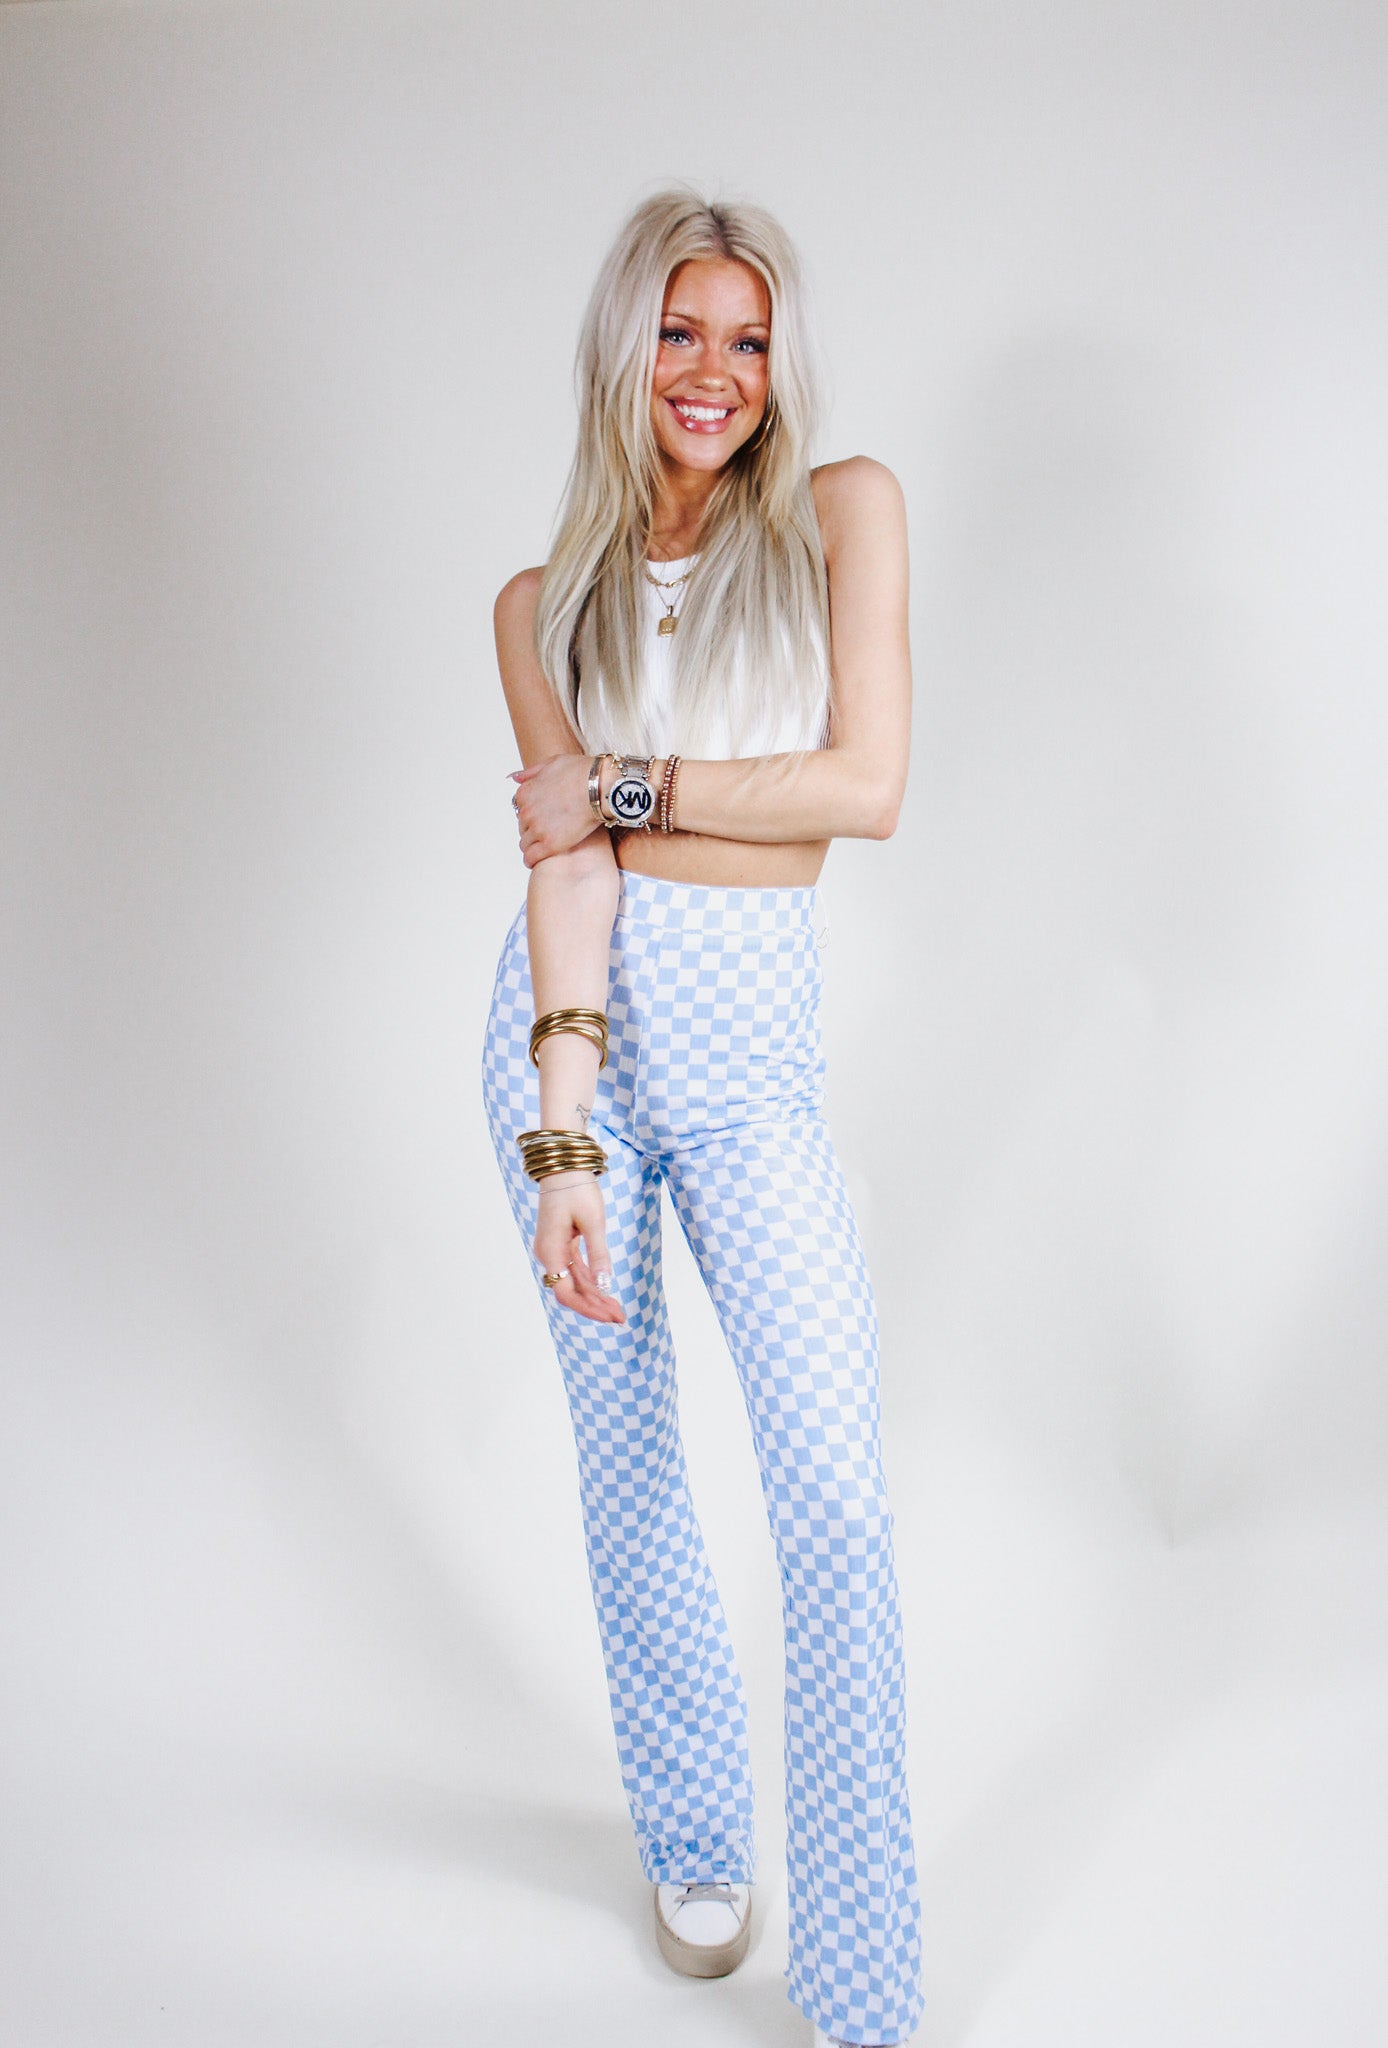 Piece Of Perfection Baby Blue Checkered Flares